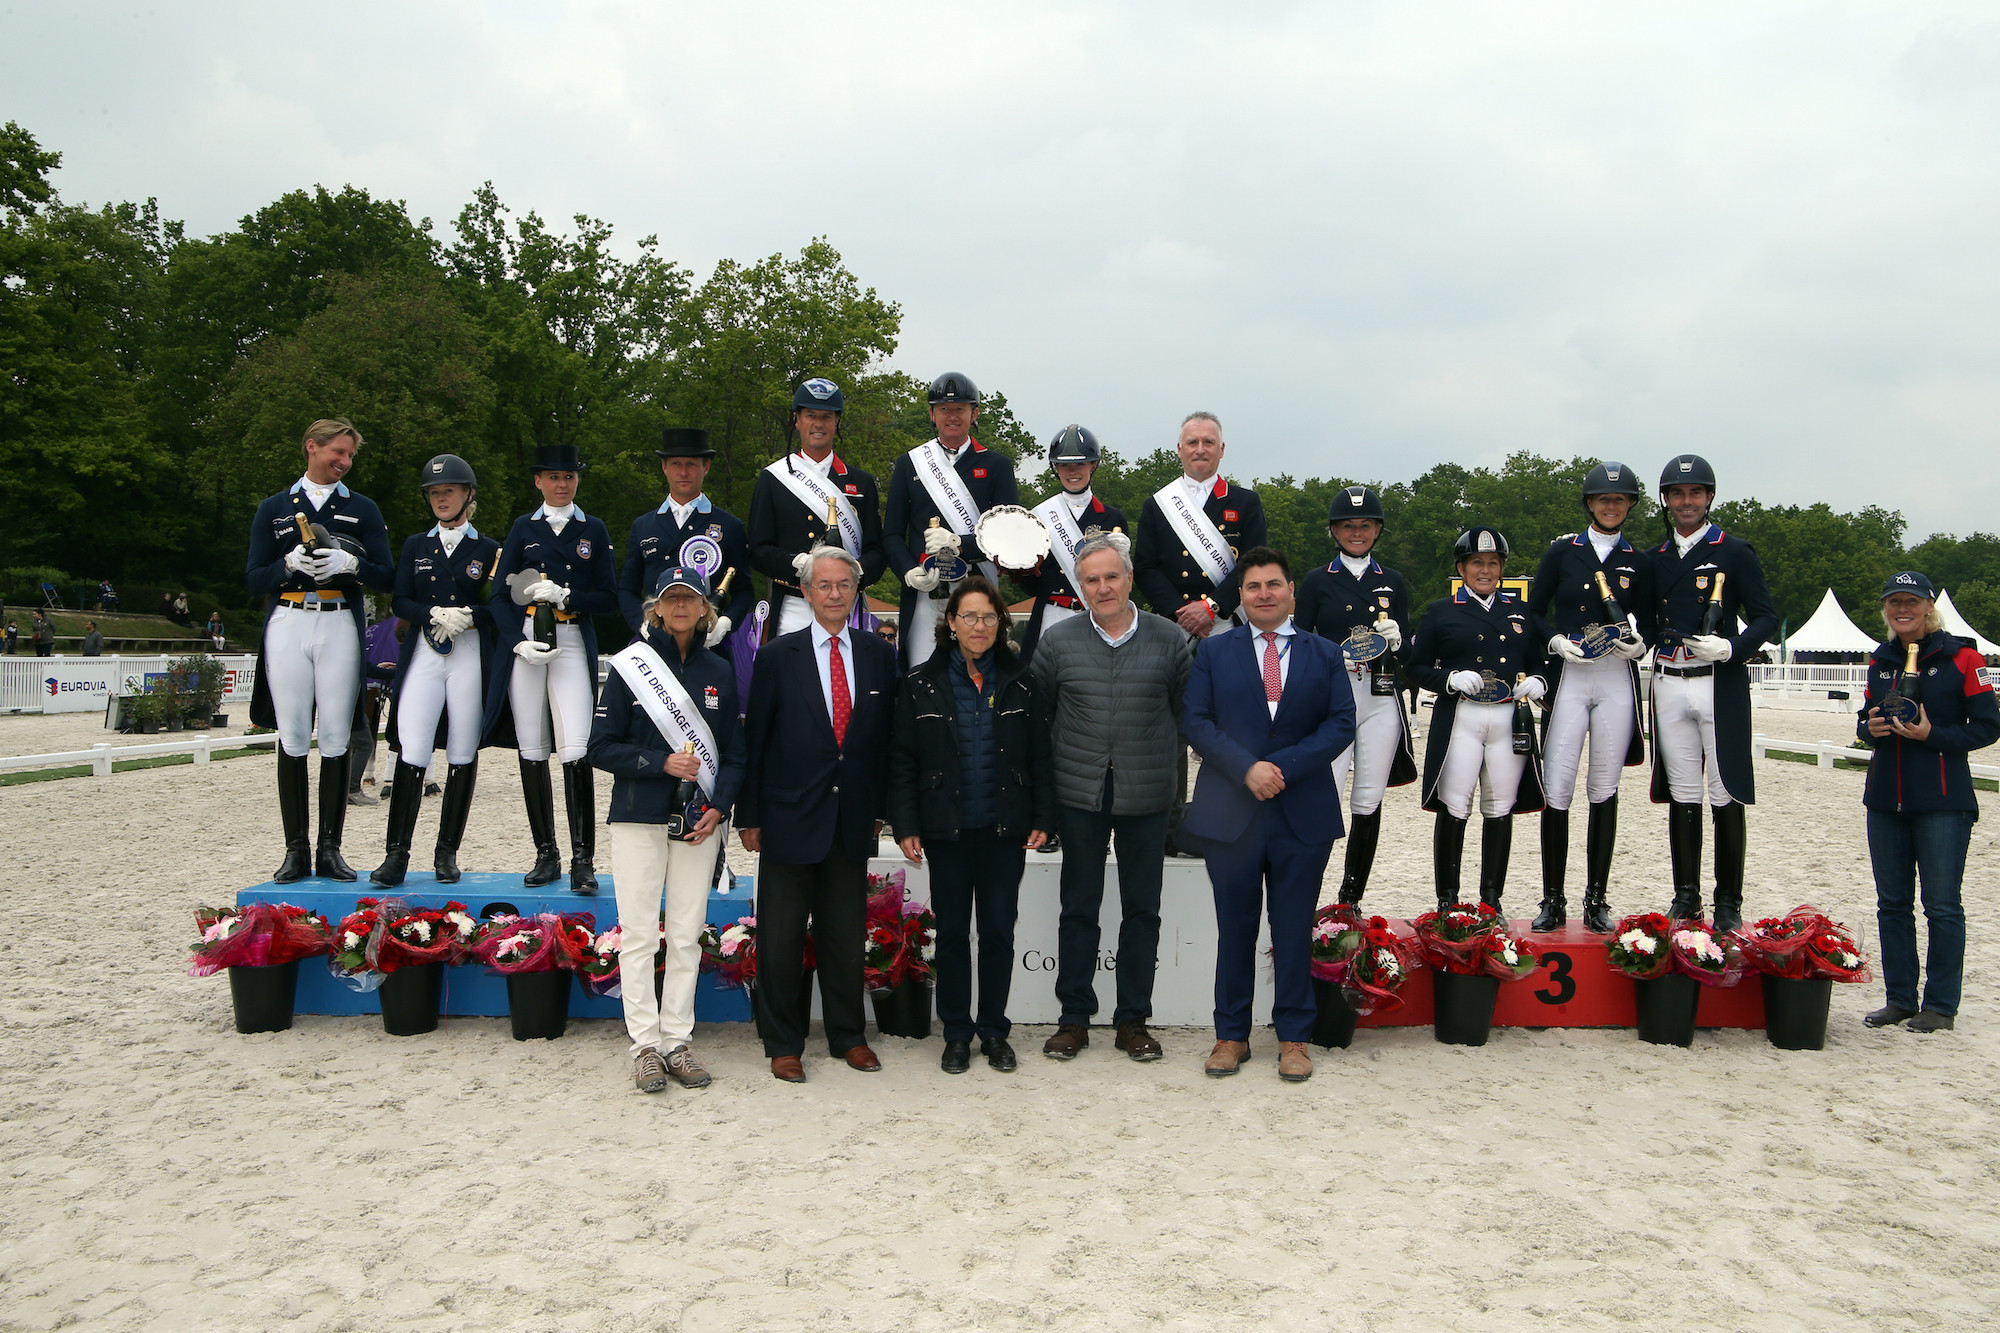 Britain triumph at FEI Dressage Nations Cup in France